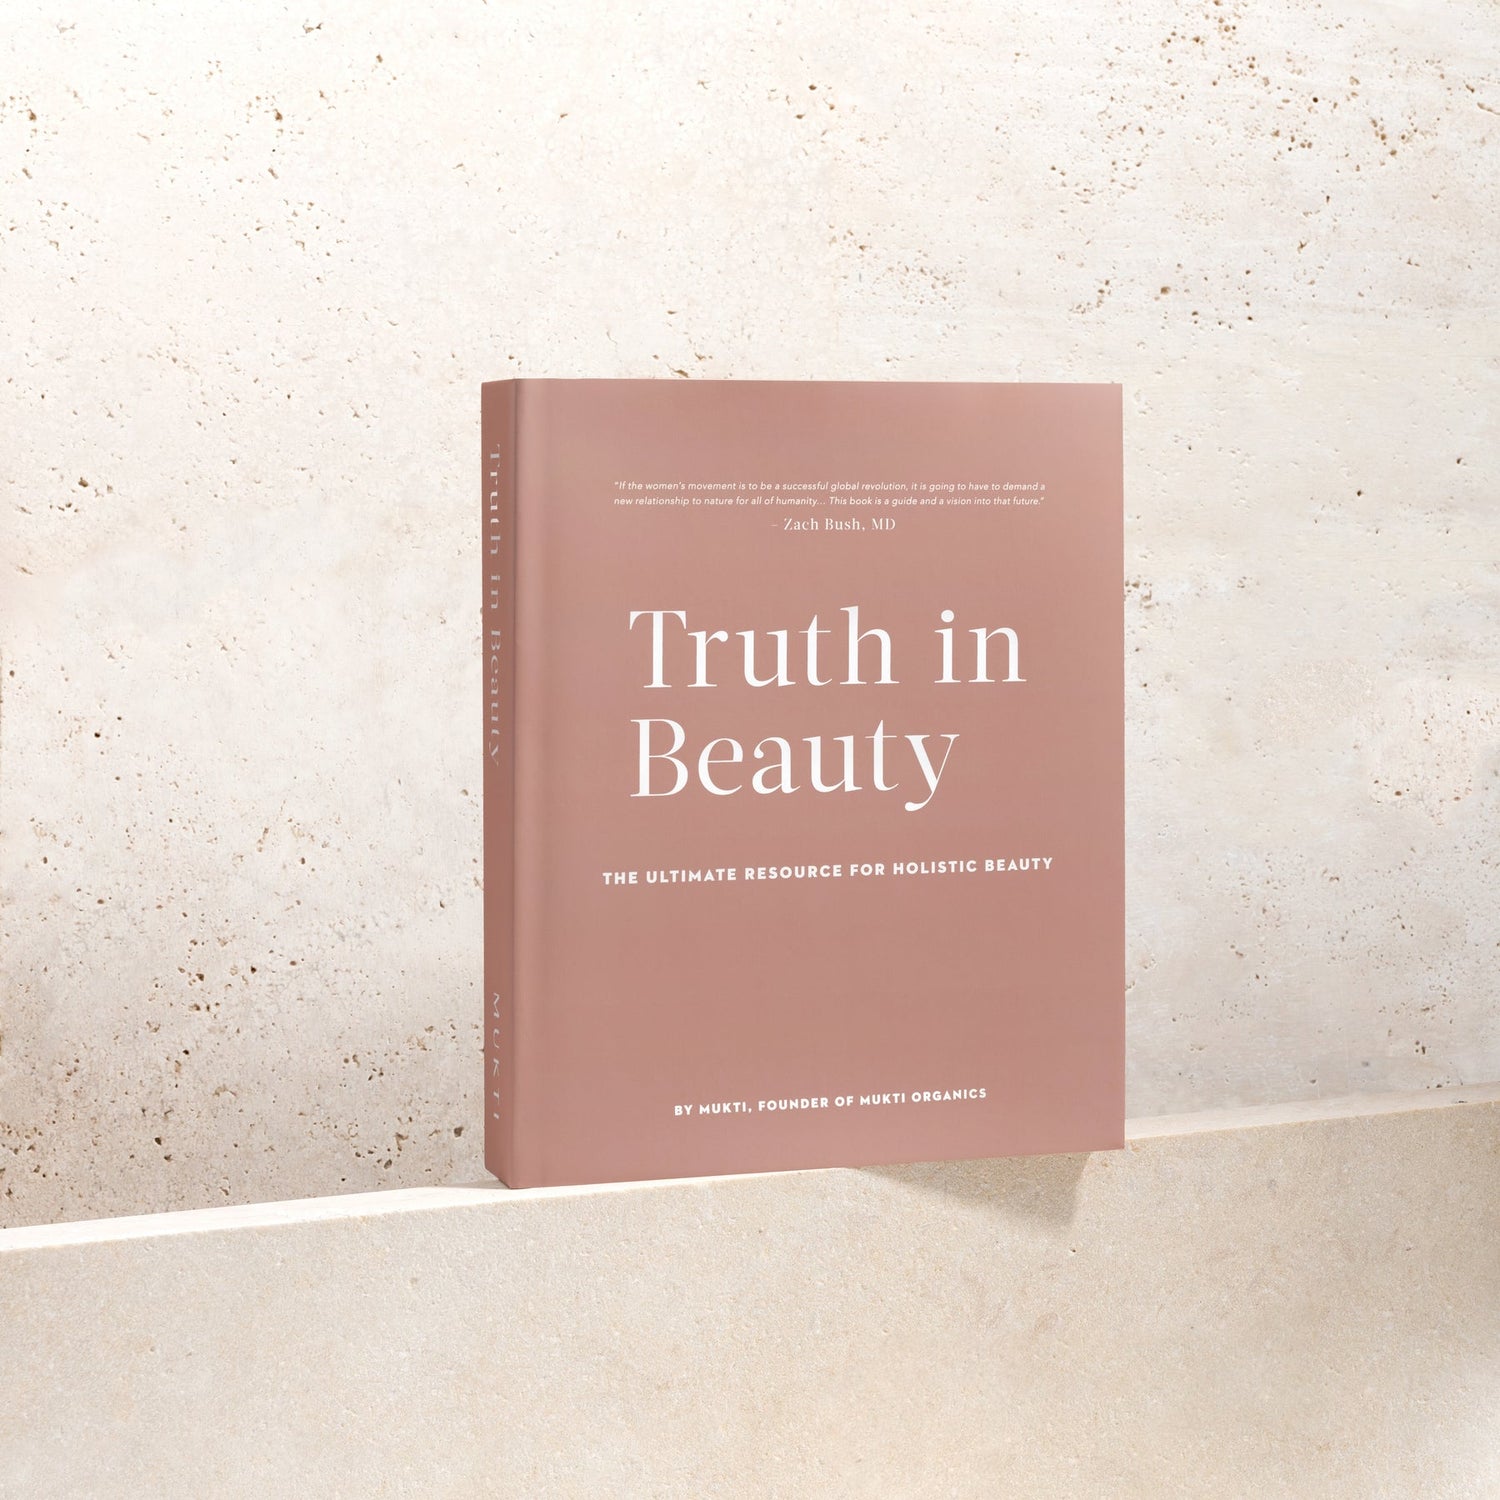 Mukti - Truth in Beauty Book - 2nd Edition (physical copy) - The Bare Theory